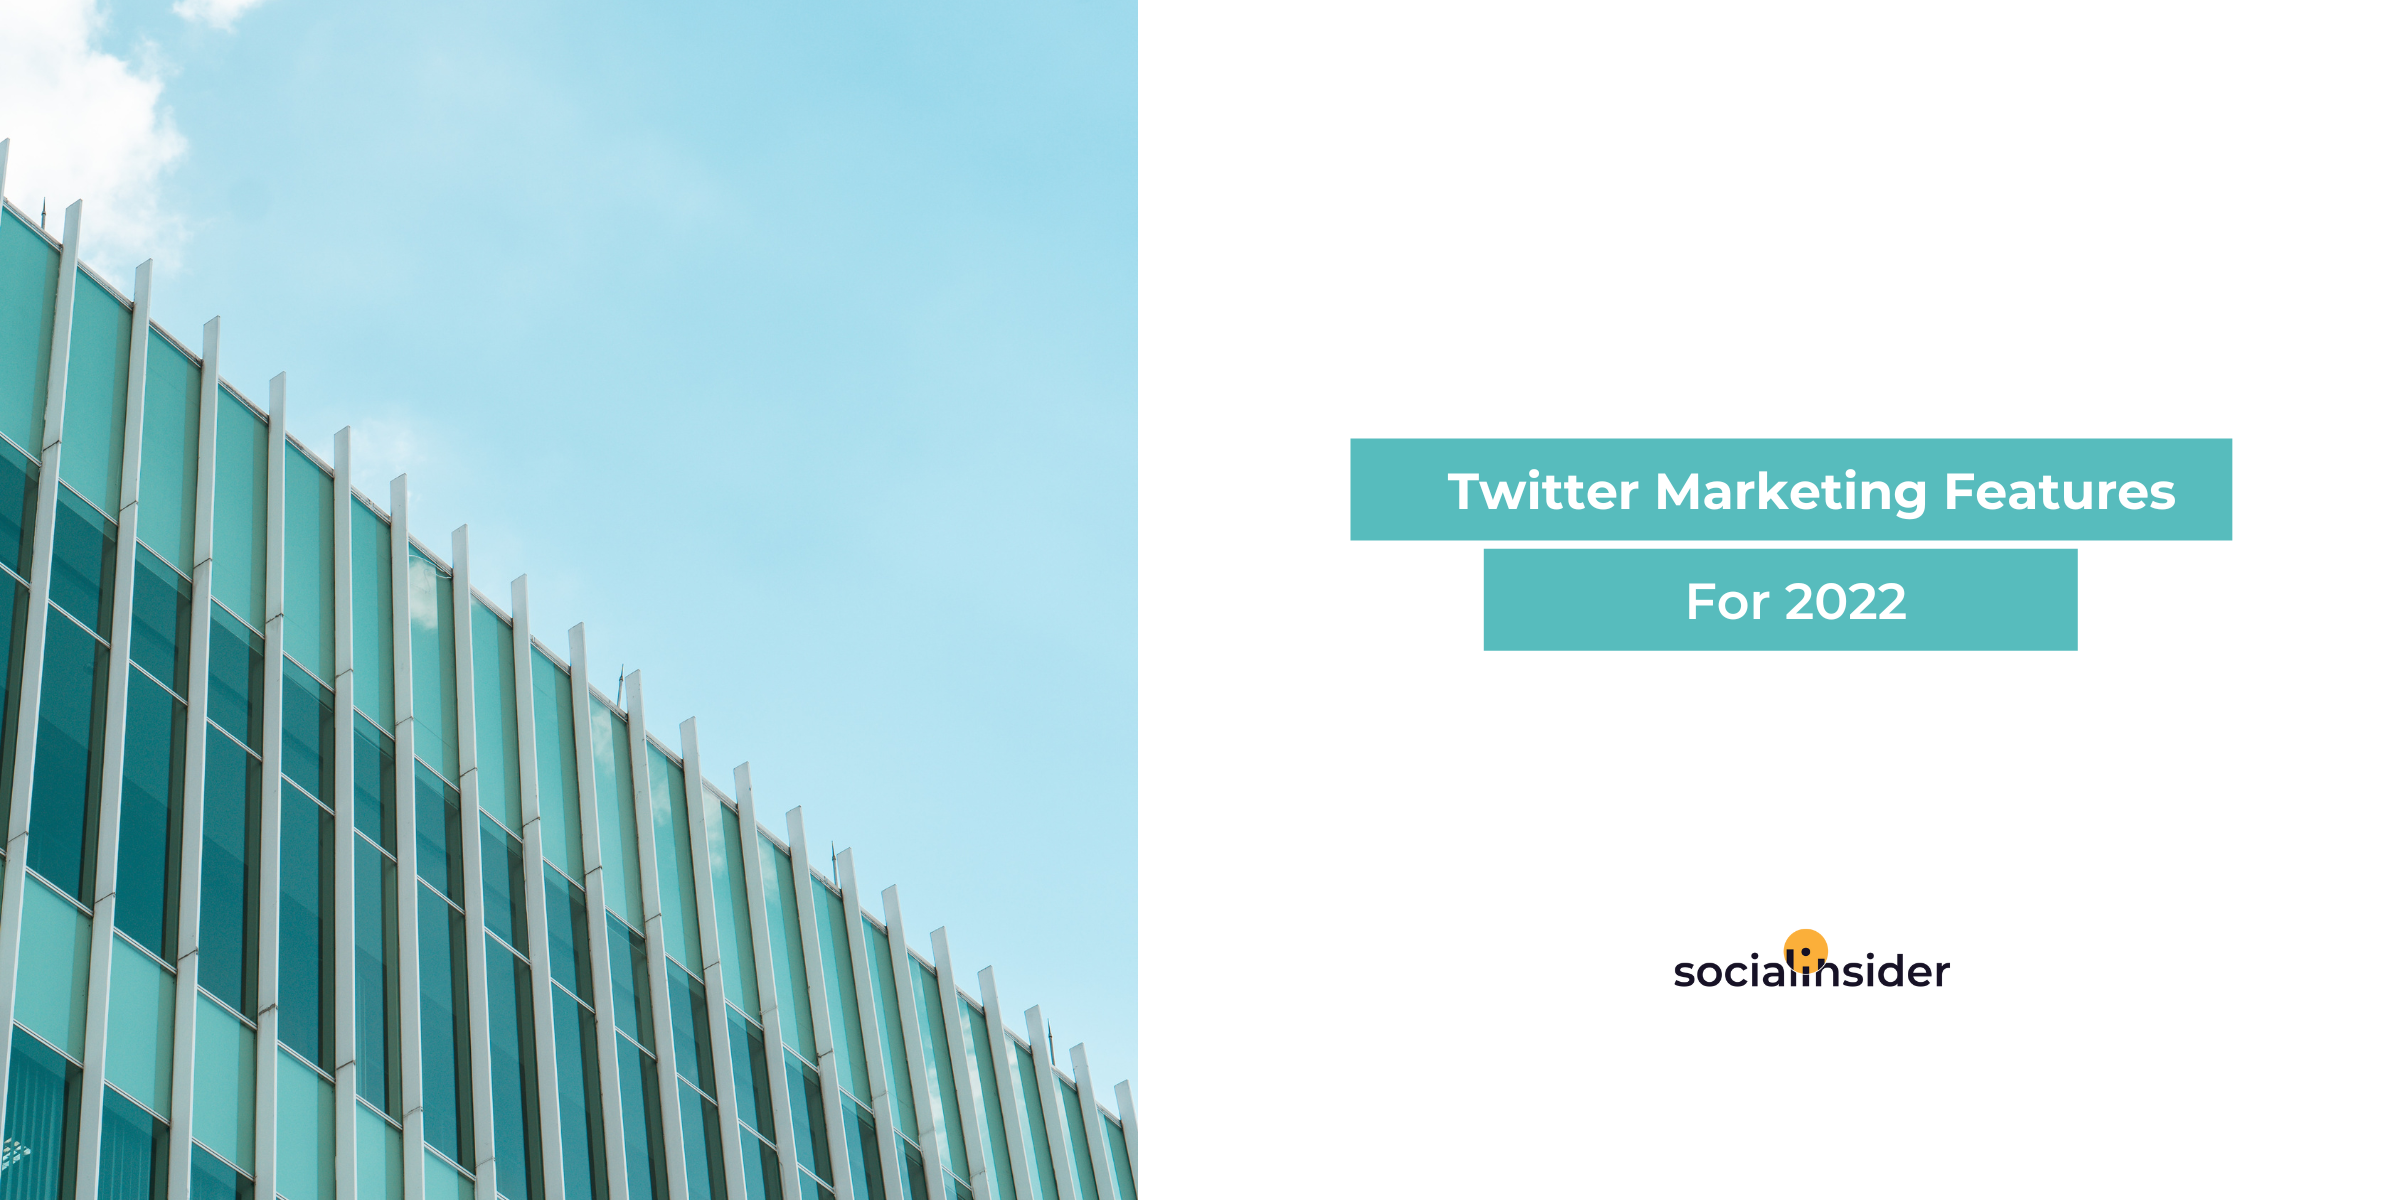 7 Twitter Marketing Features To Increase Brand Awareness In 2022